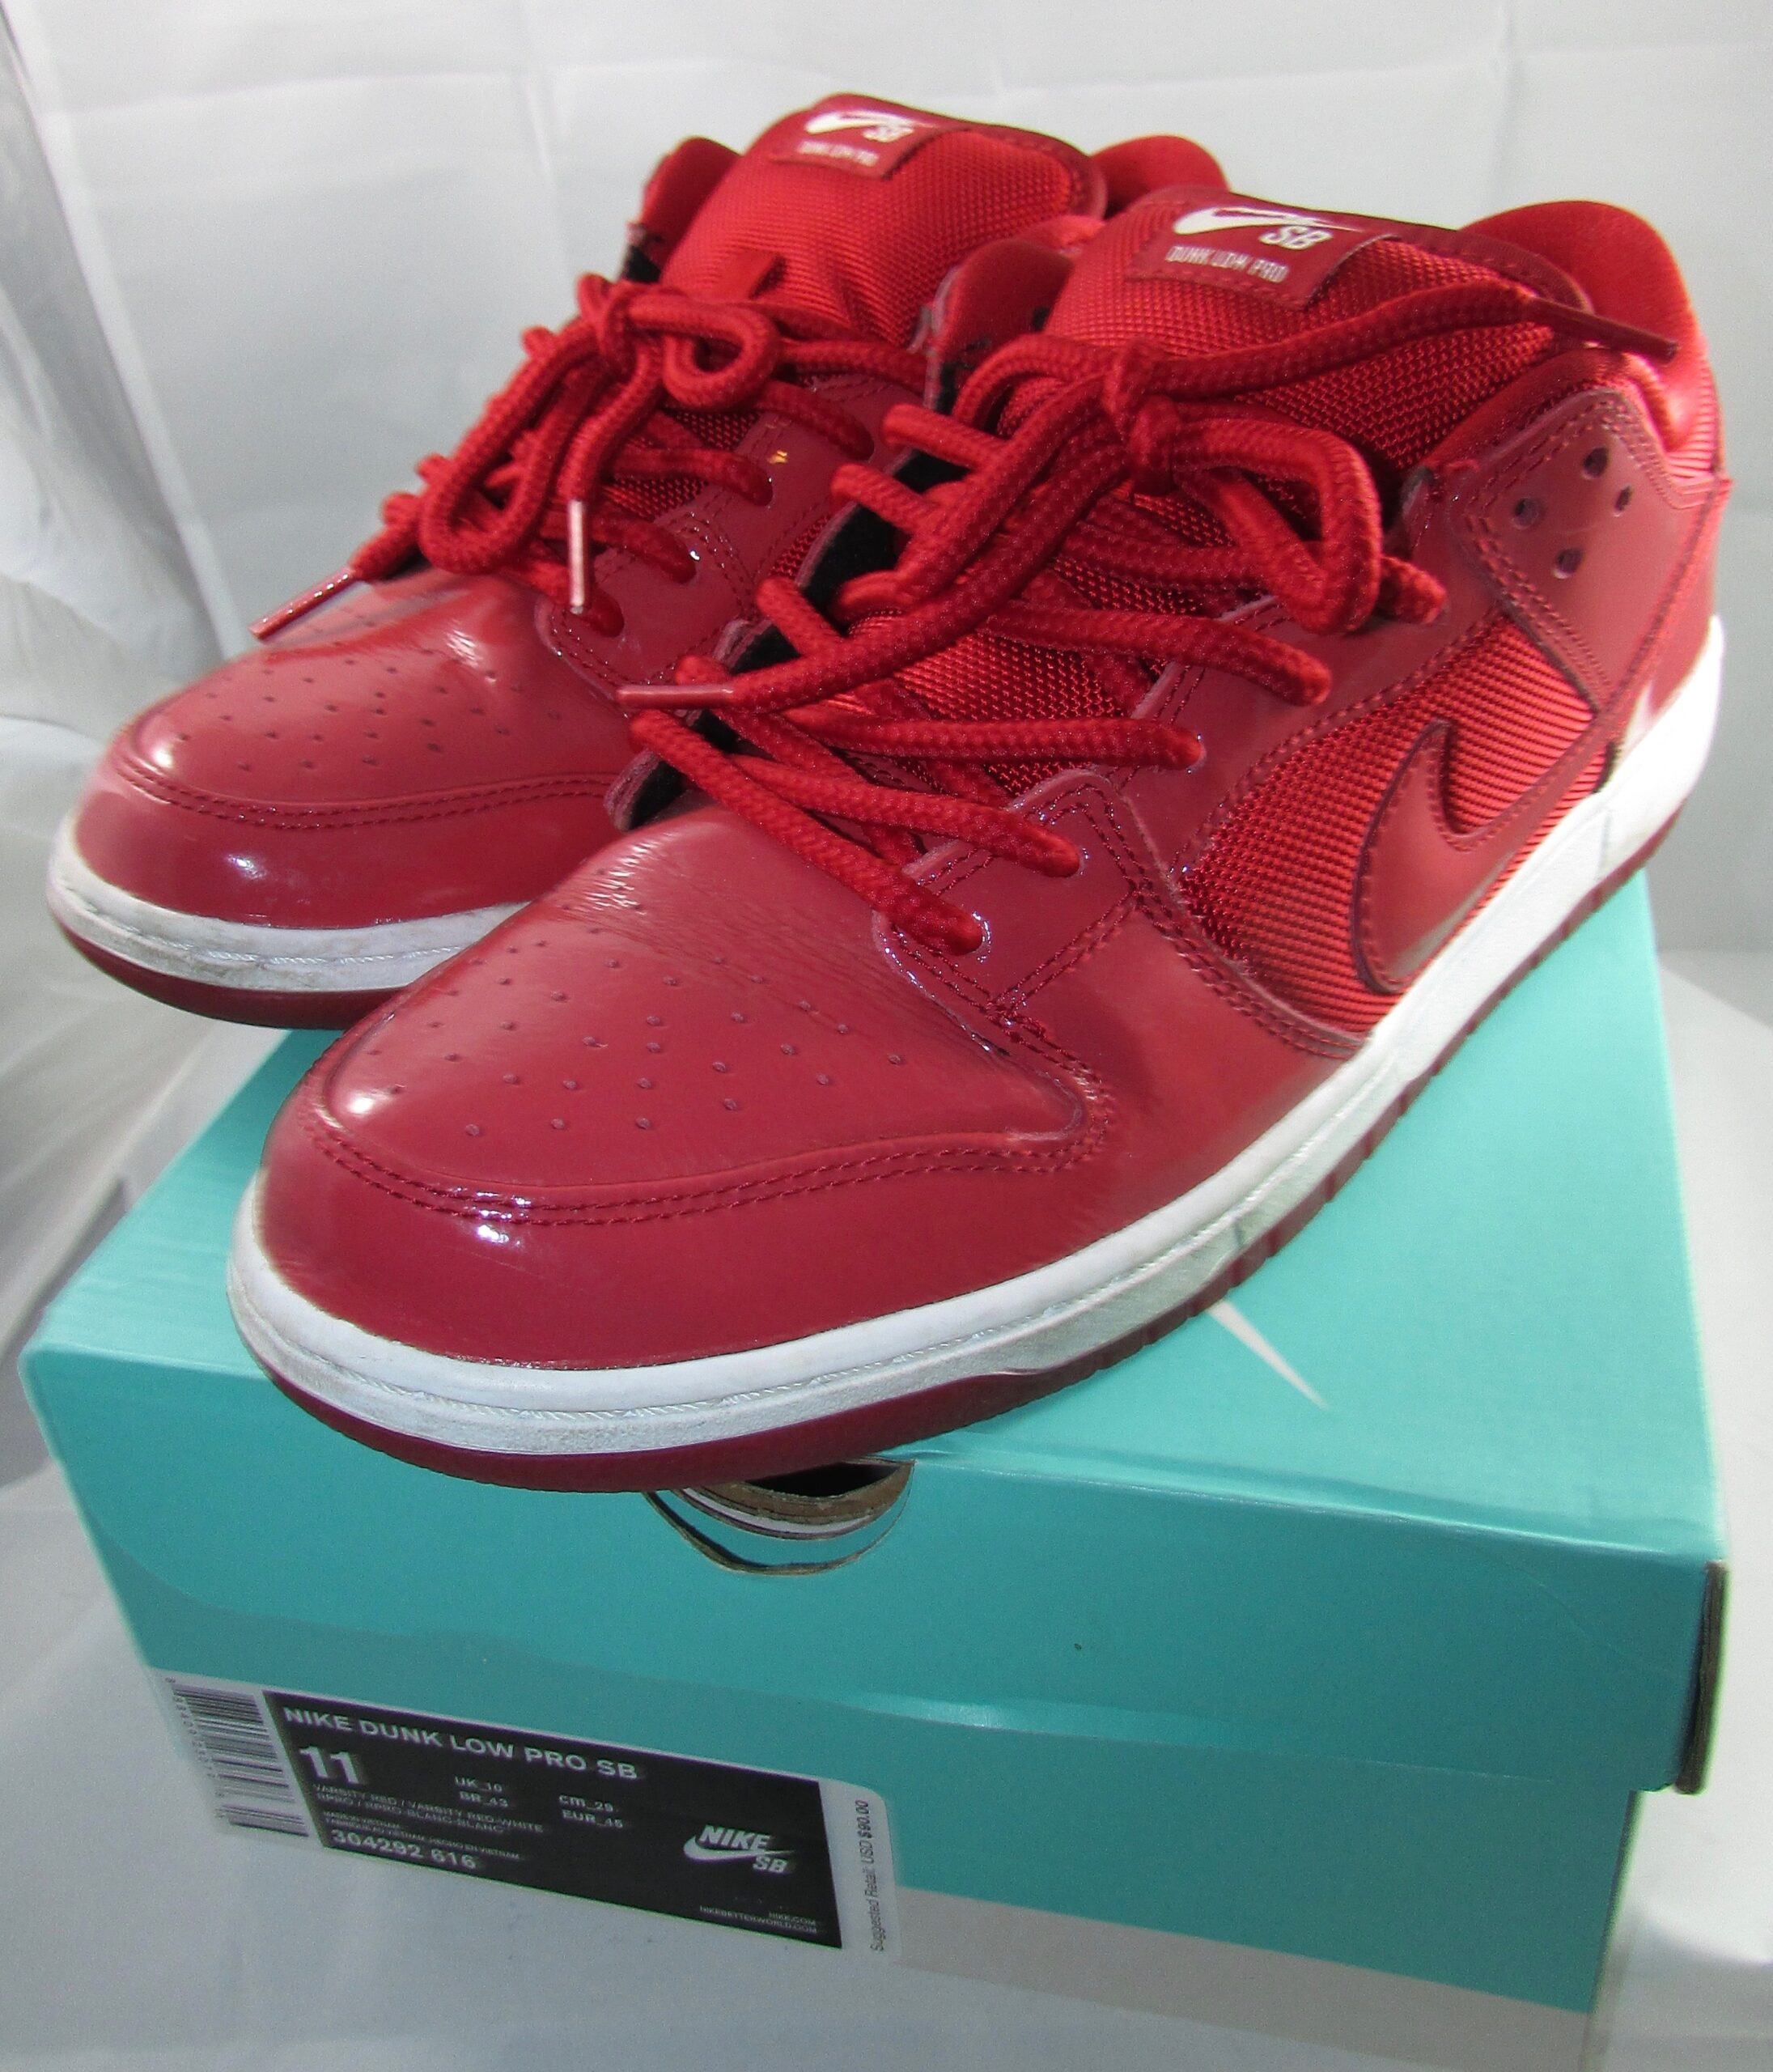 2014 Nike Dunk Low Pro SB Red Patent Leather Size 11 - Heet On